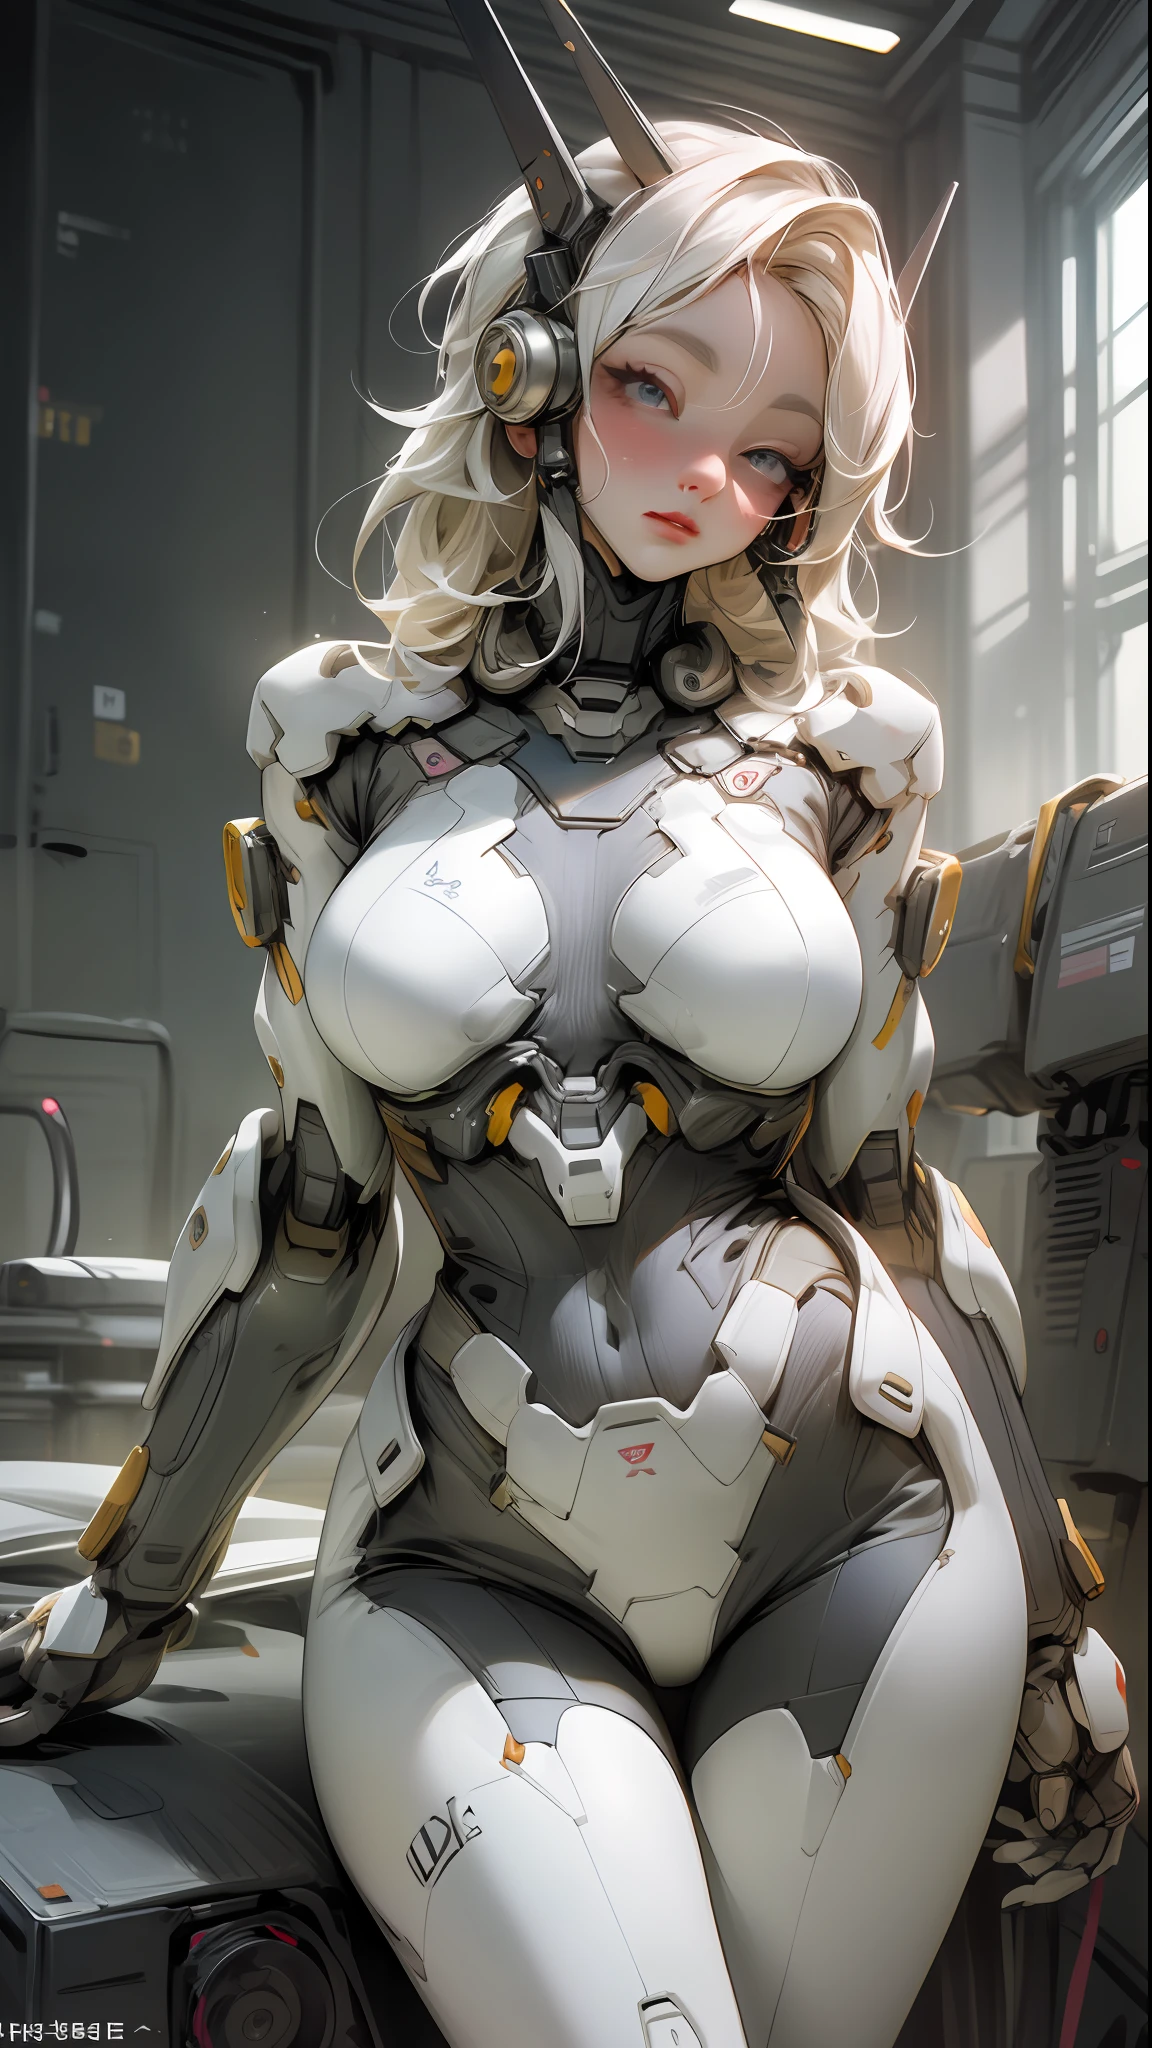 photo realism of robot mix human of maria ozawa,  human white beautiful face, uhd human huge breast, uhd human crotch, uhd human thigh, upscale (R-ESRGAN 4X+:1.4),  ultra high priority,  image enhance, wearing a megatron mech suit ,  pink and gold, very minimum covered breast, very minimum  panties, robot mech anatomy ,  robot mech limbs, ultra high detailed , (uhd wonderfully accurately finely detailed), (uhd perfect anatomy),  uhd full body, uhd perfect white beautiful face maria ozawa,  uhd whitest  skin, uhd Best quality, 64k, 32k, uhd Masterpiece, (UHD:1.4), 1girl, uhd huge breasts,  uhd perfect body, uhd detailed  face, uhd red lips, eyes, uhd double eyelid, uhd resolution, uhd whitened skin, uhd perfect beautiful face, uhd medium hair, uhd thigh, glossy skin), (uhq:1.4), model pose,  open thigh, (4x ultra sharp fokus;1.2) , (uhd perfect white korean:1.4) , (uhd perfect white albino :1.1), wonderfully accurately finely quality CG unity k wallpaper, uhd pale toned lavender color eyes, uhd healthy skin, ultra high detailed skin features)),denoise, no grain, remove noise, remove grain, sharpen,